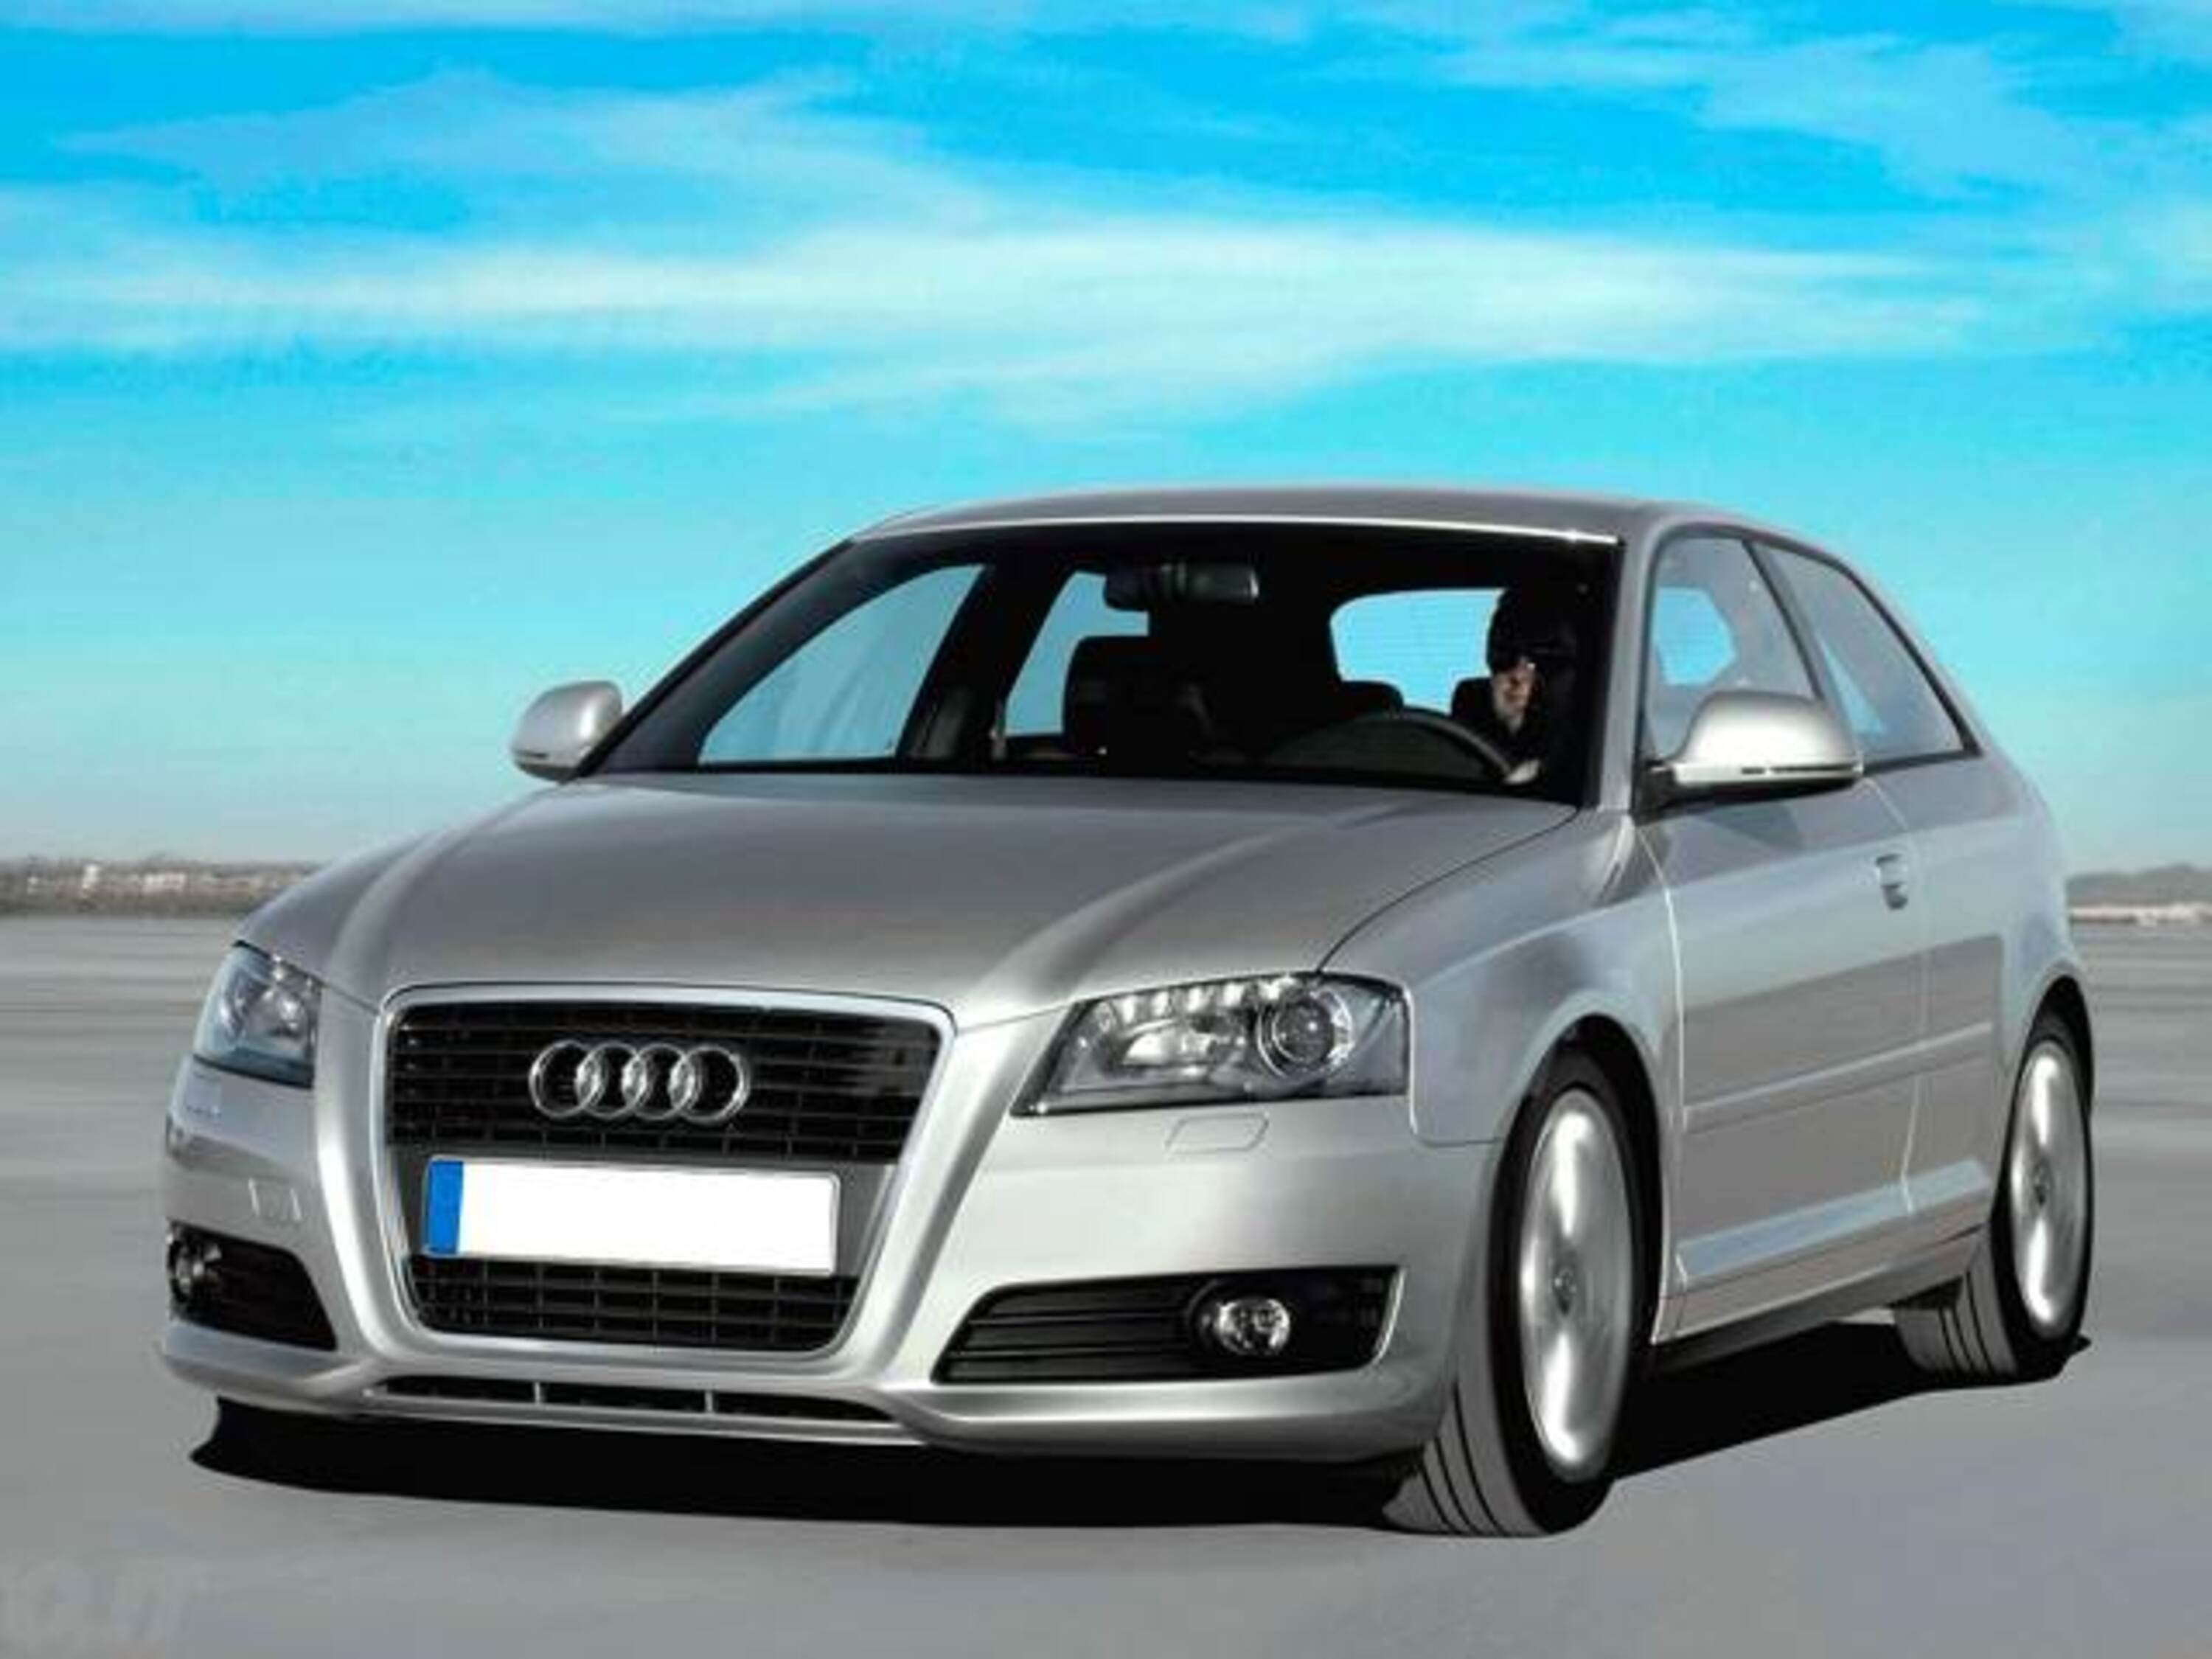 Audi A3 1.2 TFSI Attraction